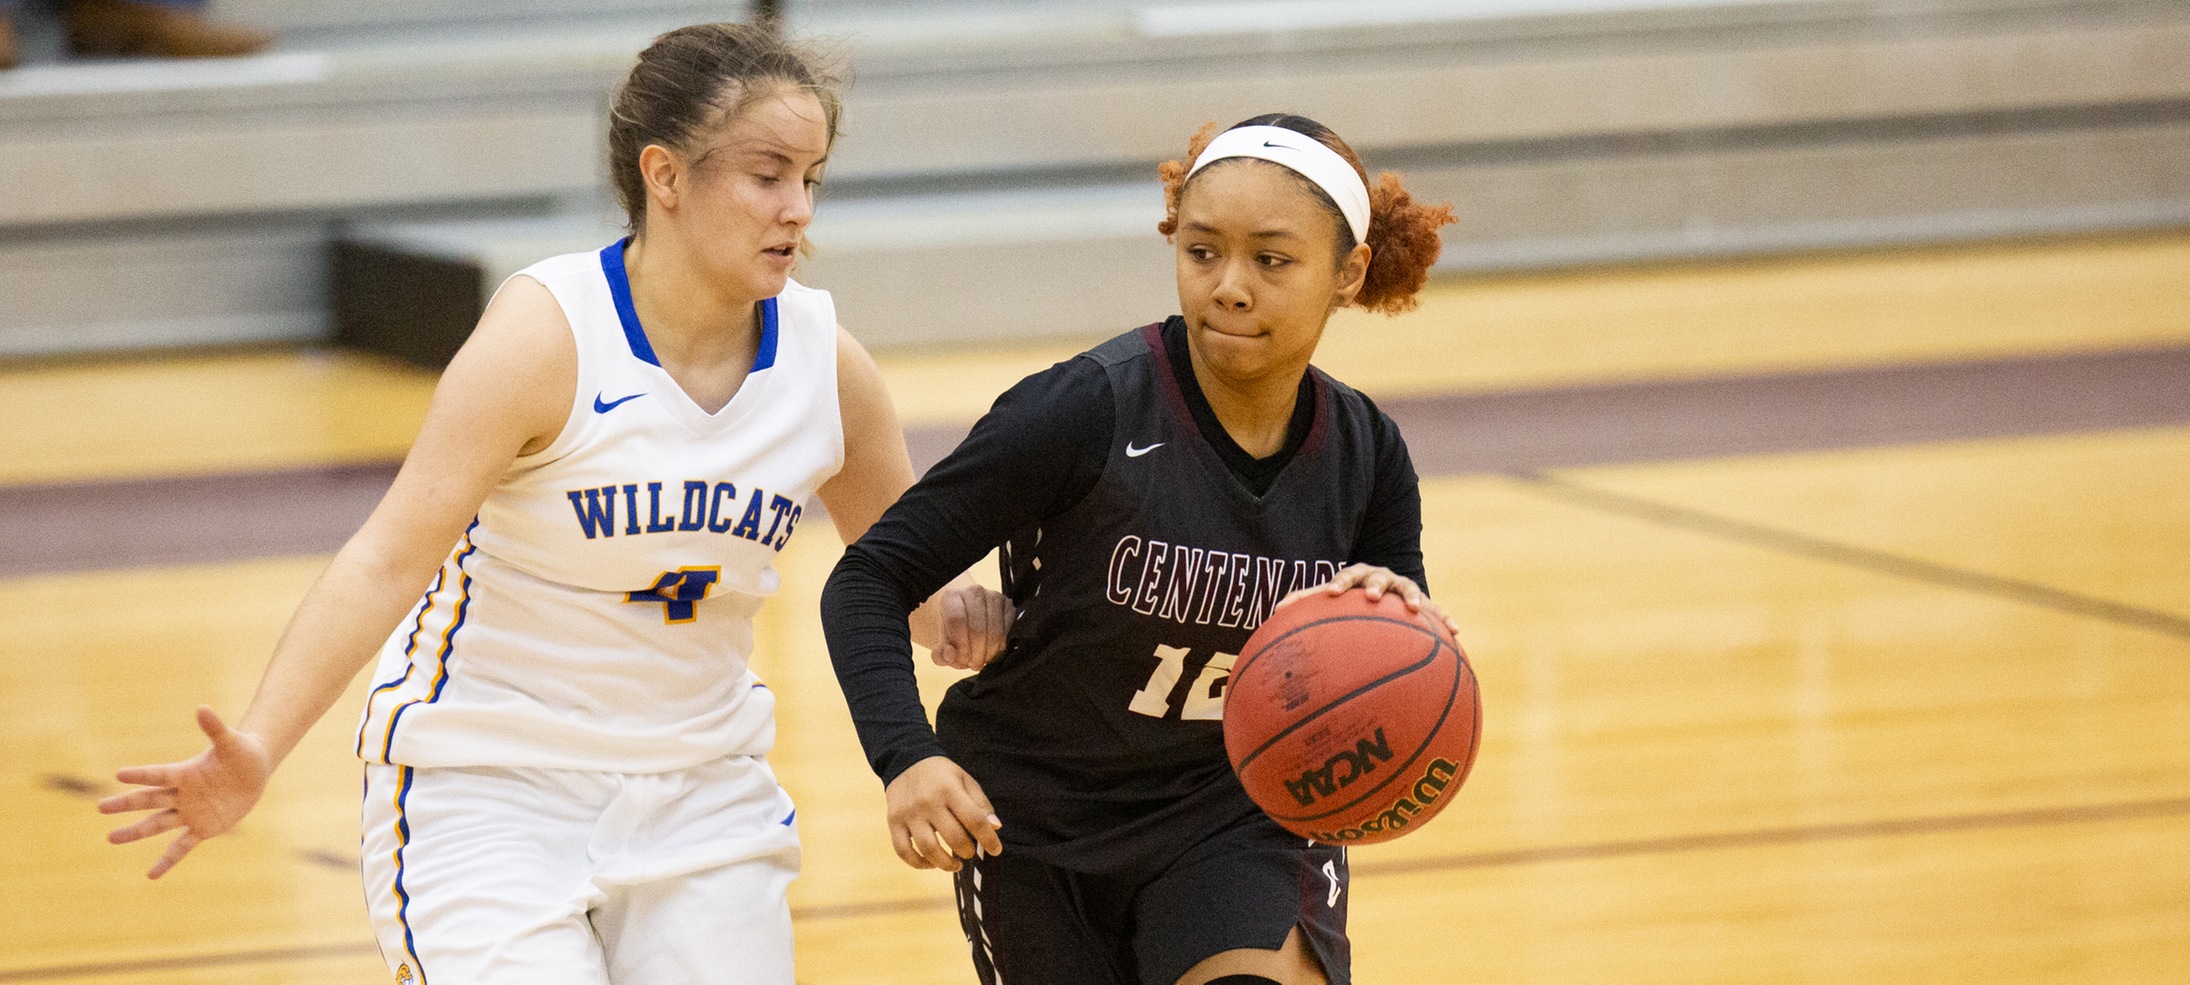 Women's Basketball Falls To Nationally Ranked Trinity At Home